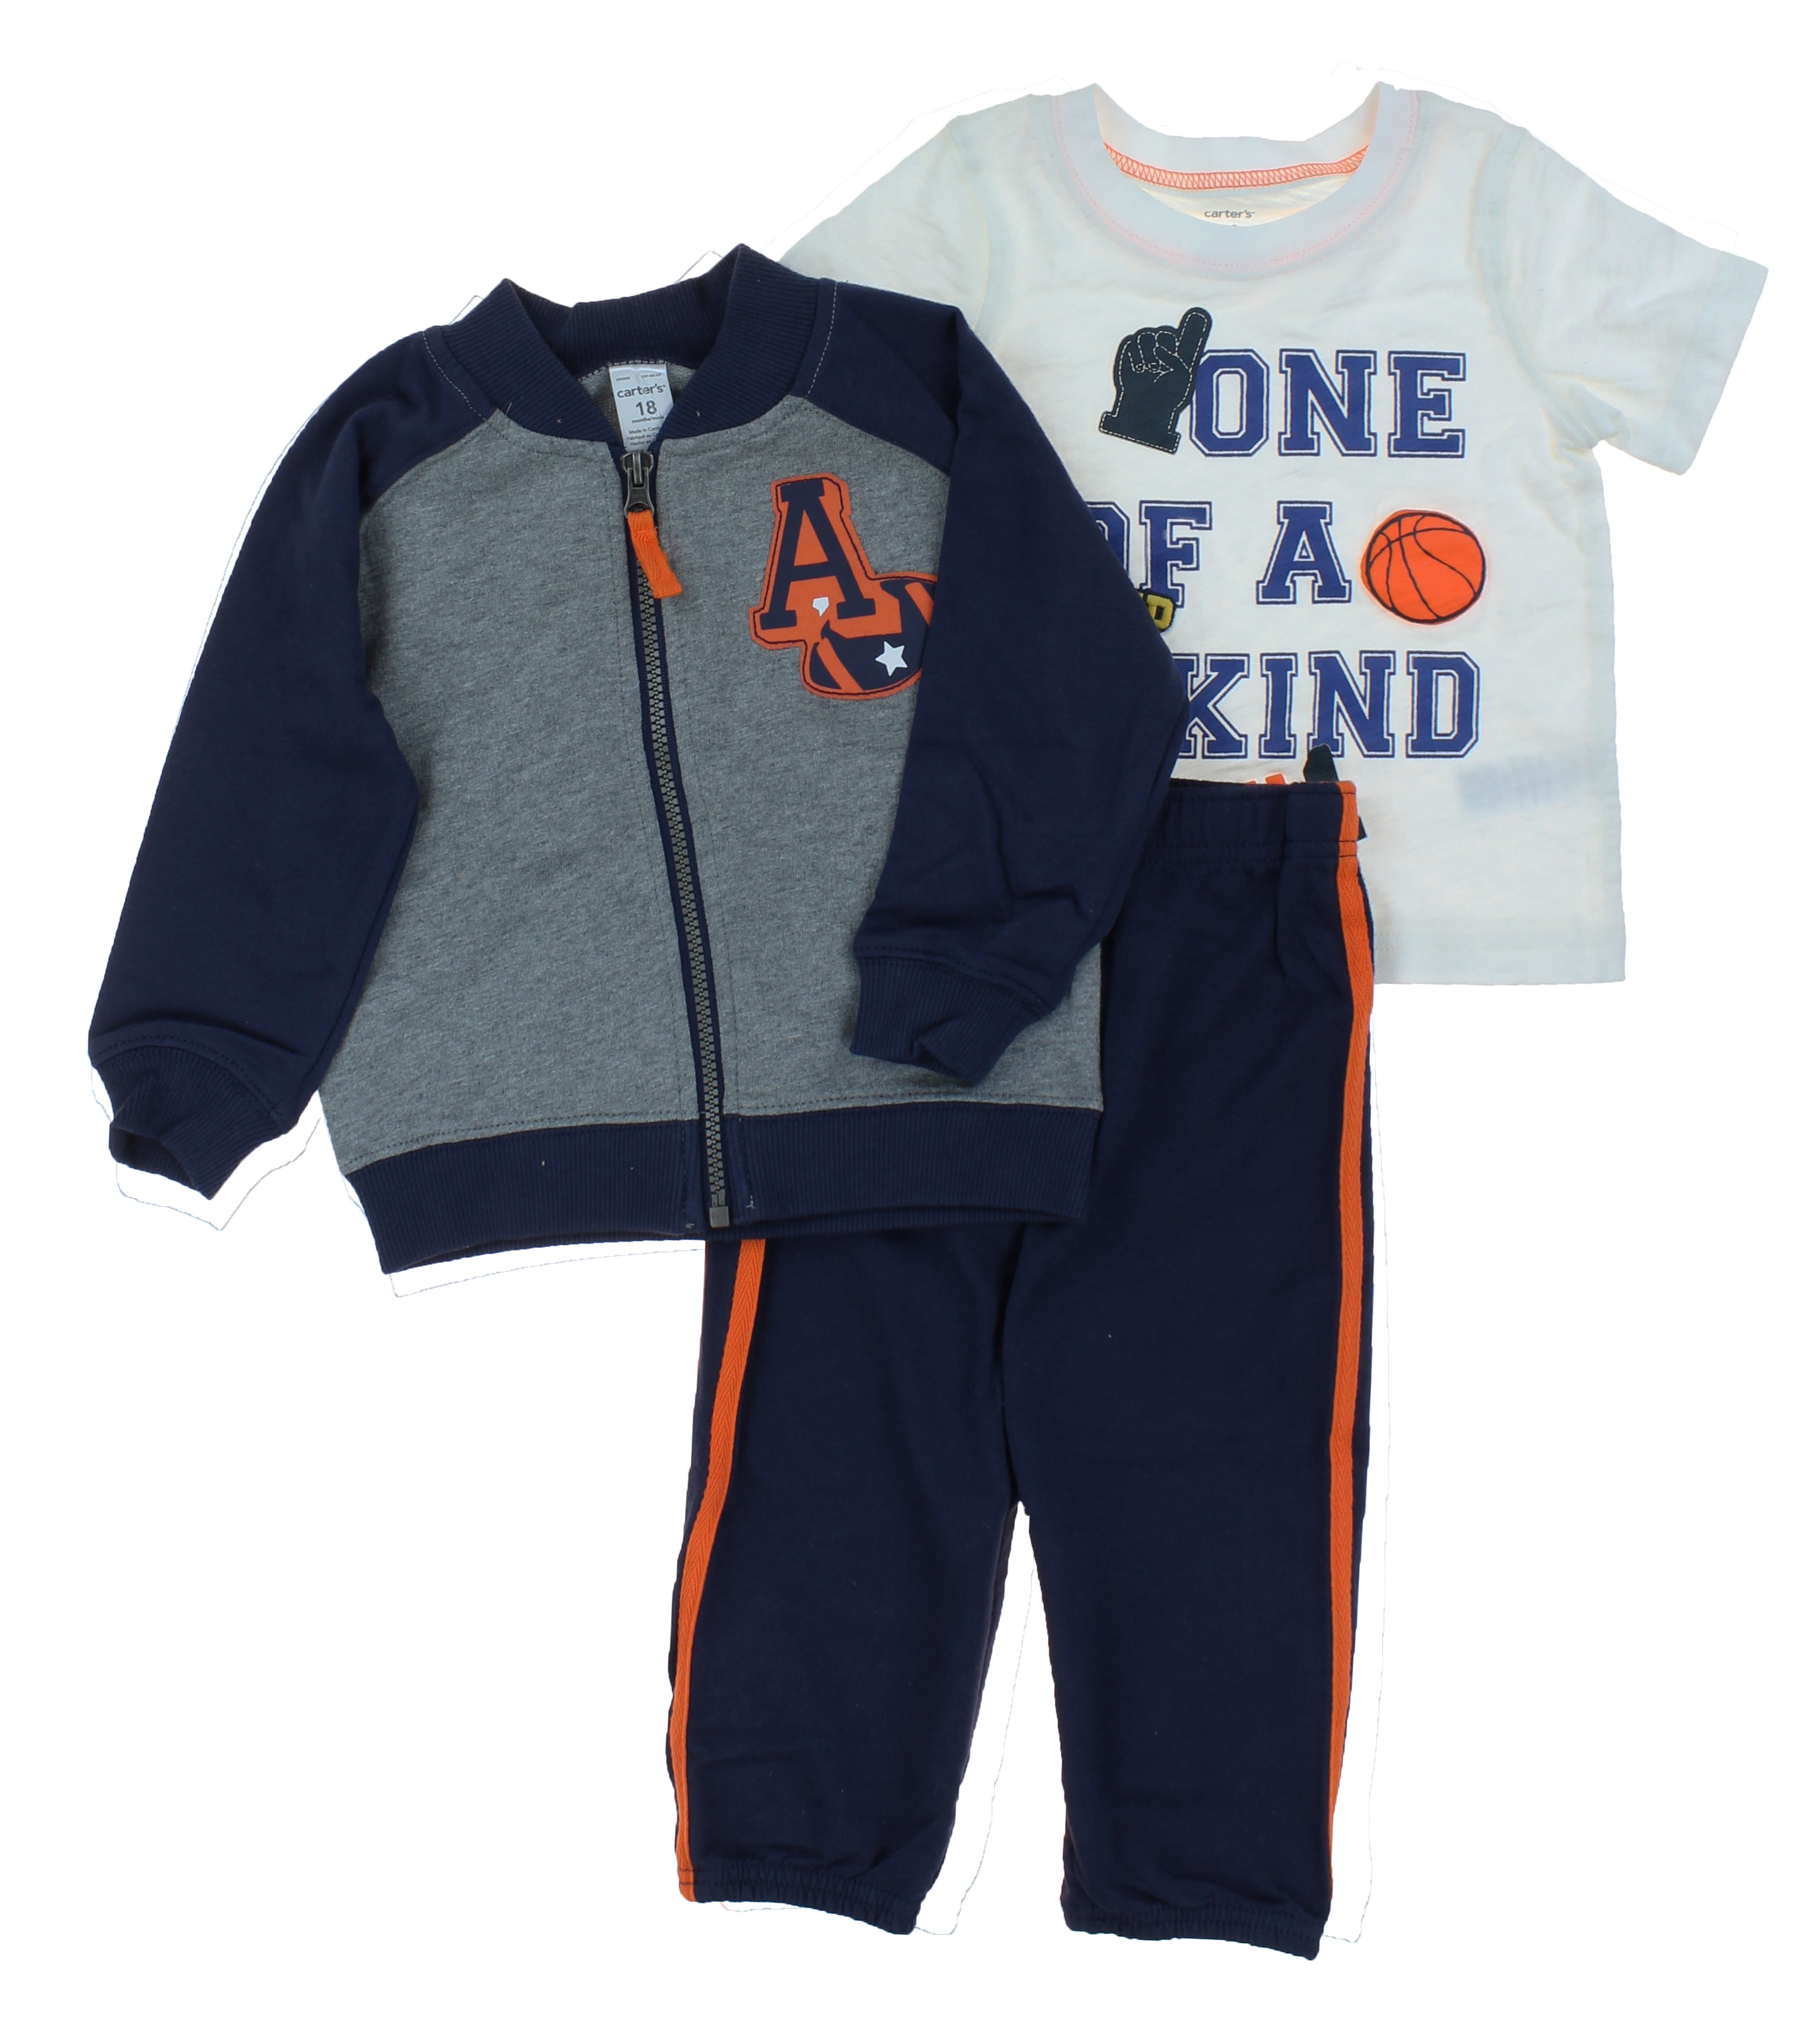 Carters Boys 3 Piece Outfit Set- 2 Tops, 1 Pant (One of a Kind, 5T